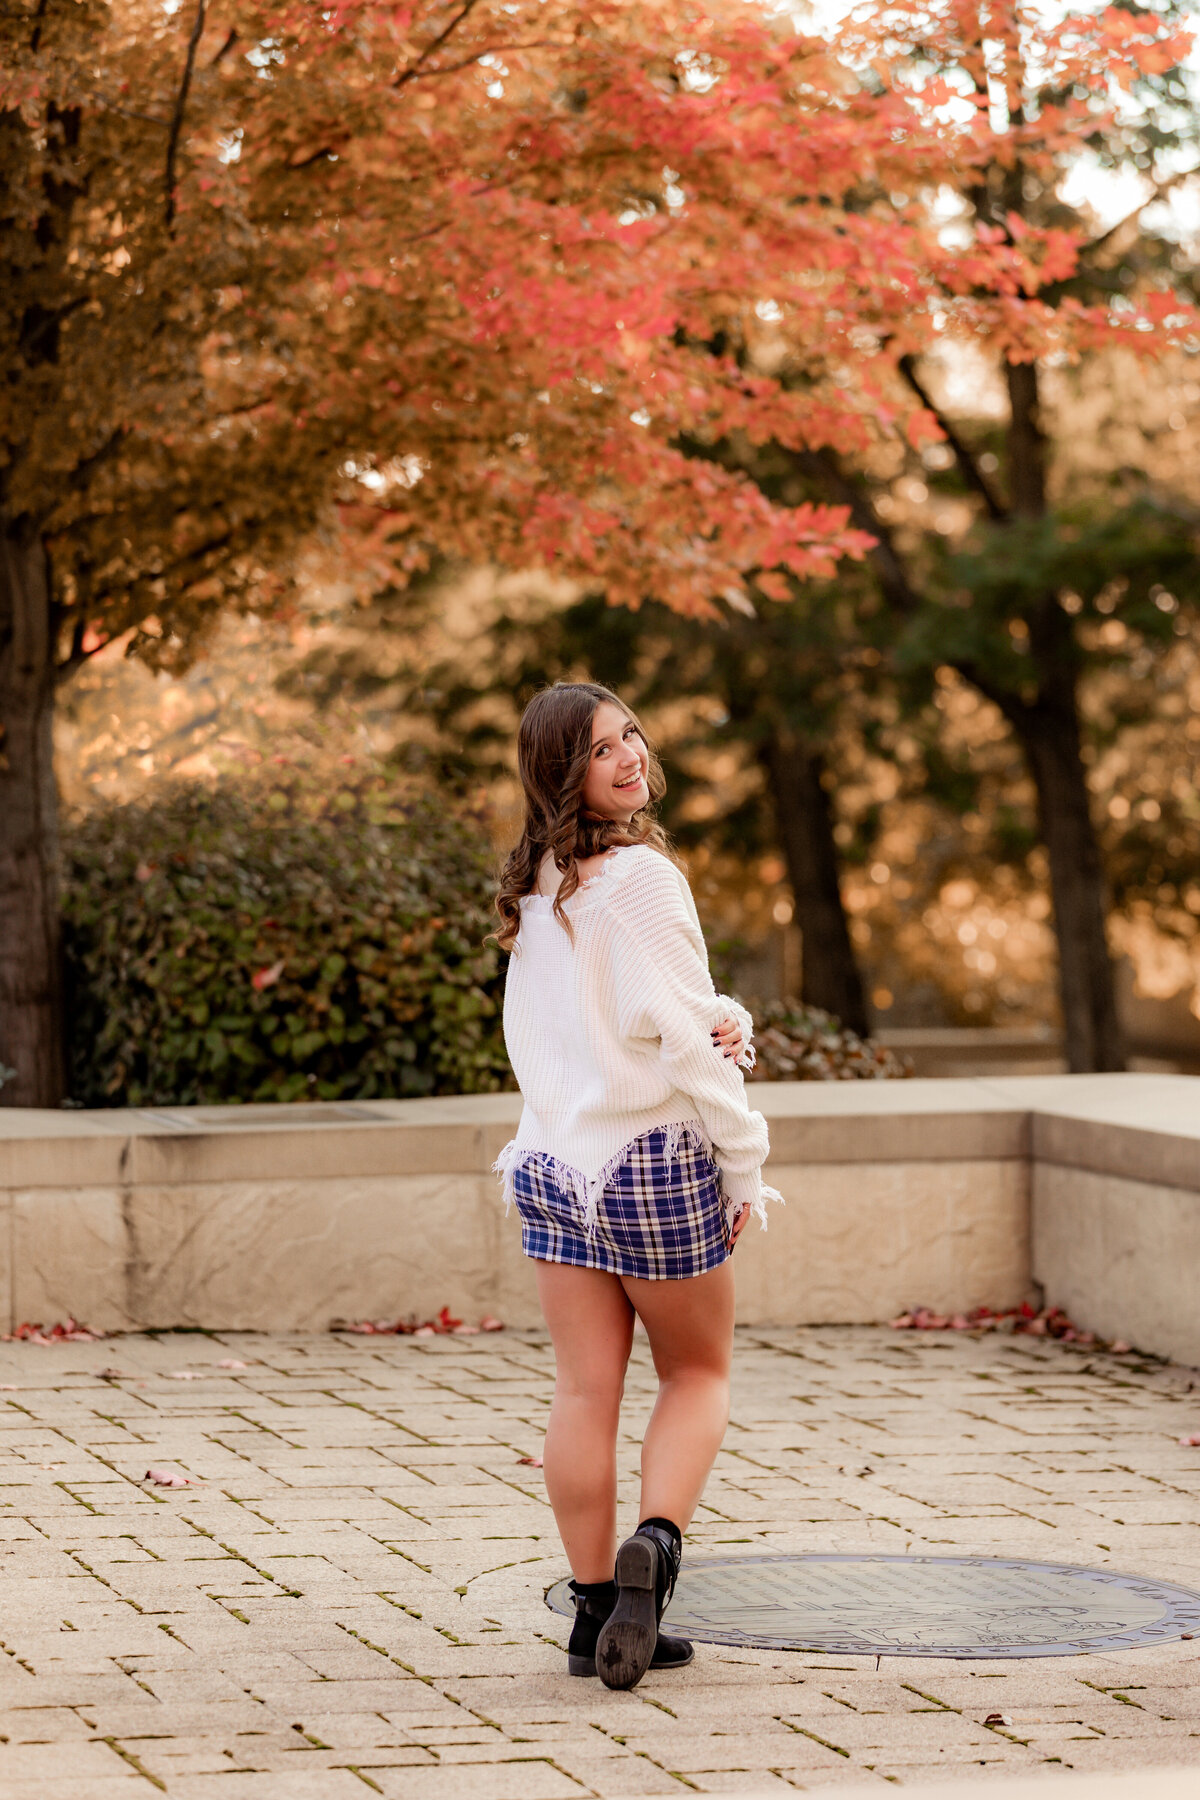 A girl in a plaid skirt playfully looks over her shoulder.